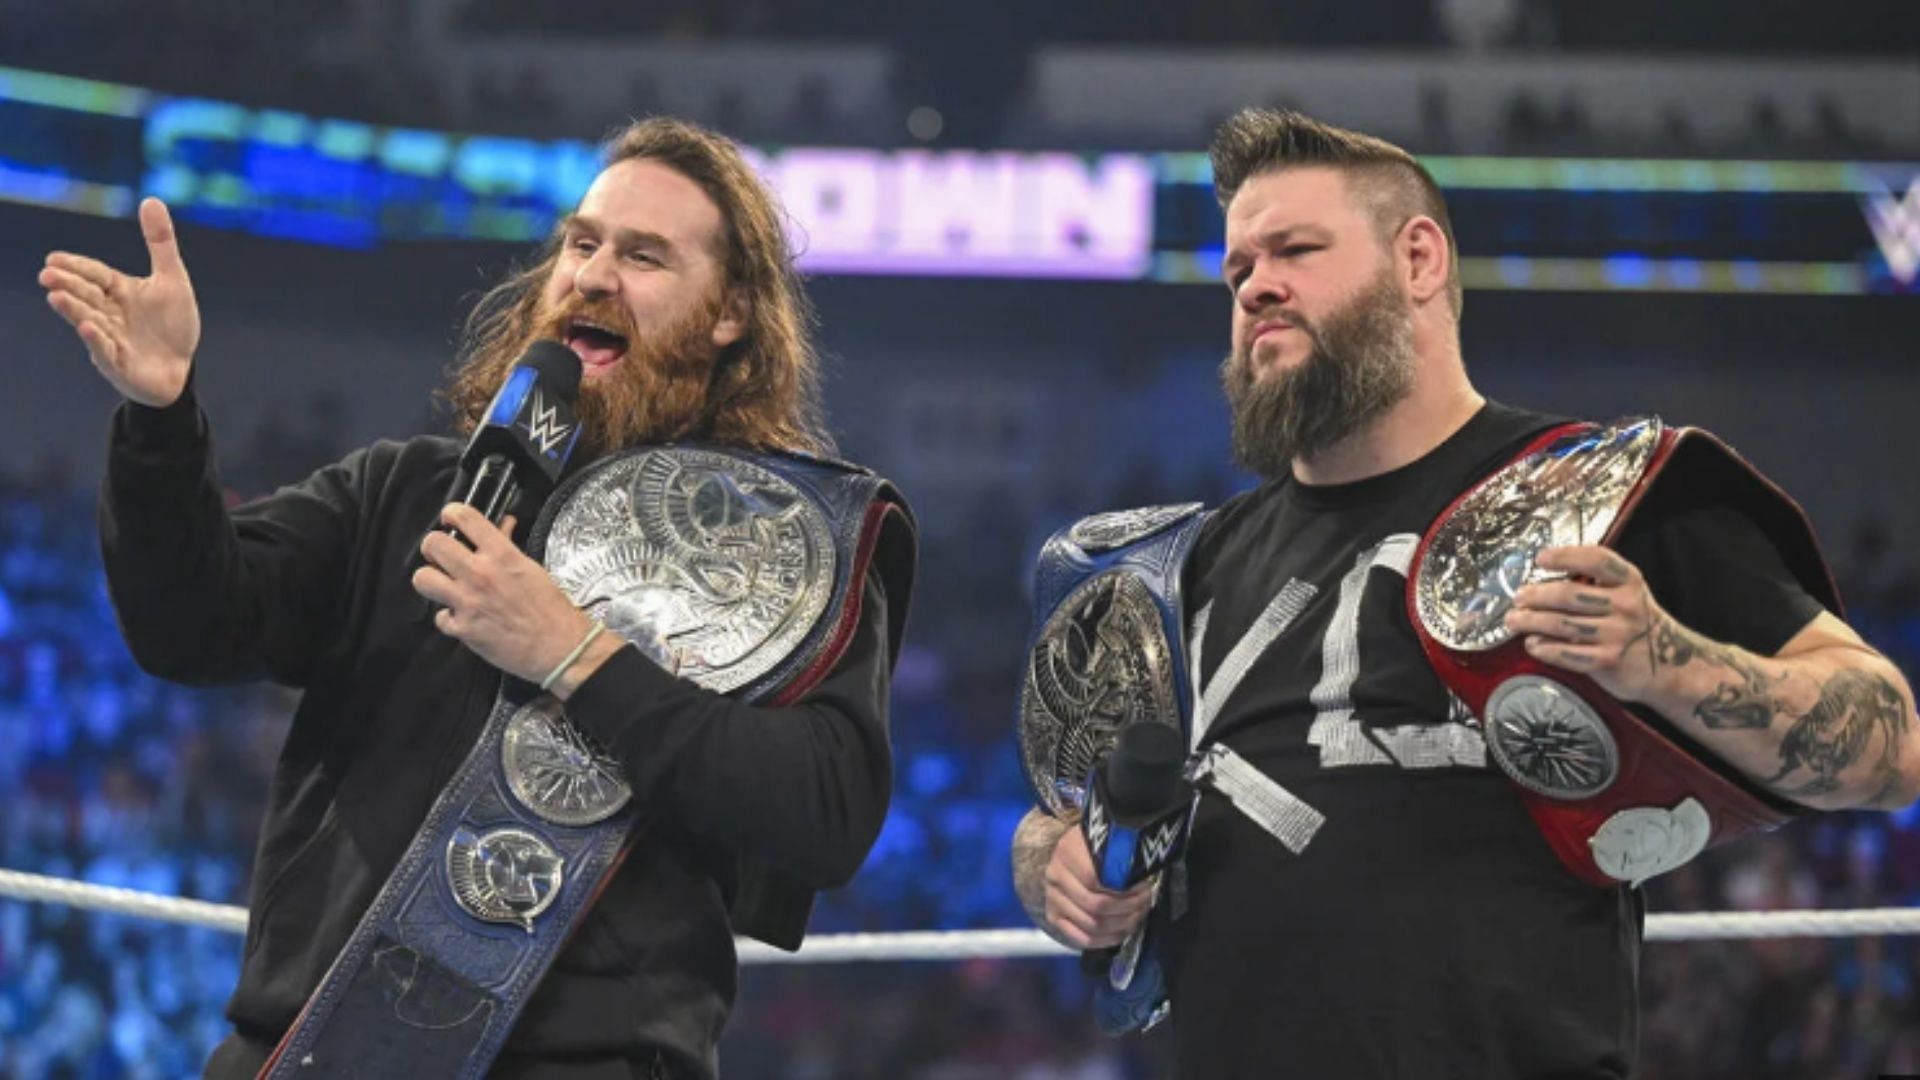 Sami Zayn and Kevin Owens will defend their titles on SmackDown this week.